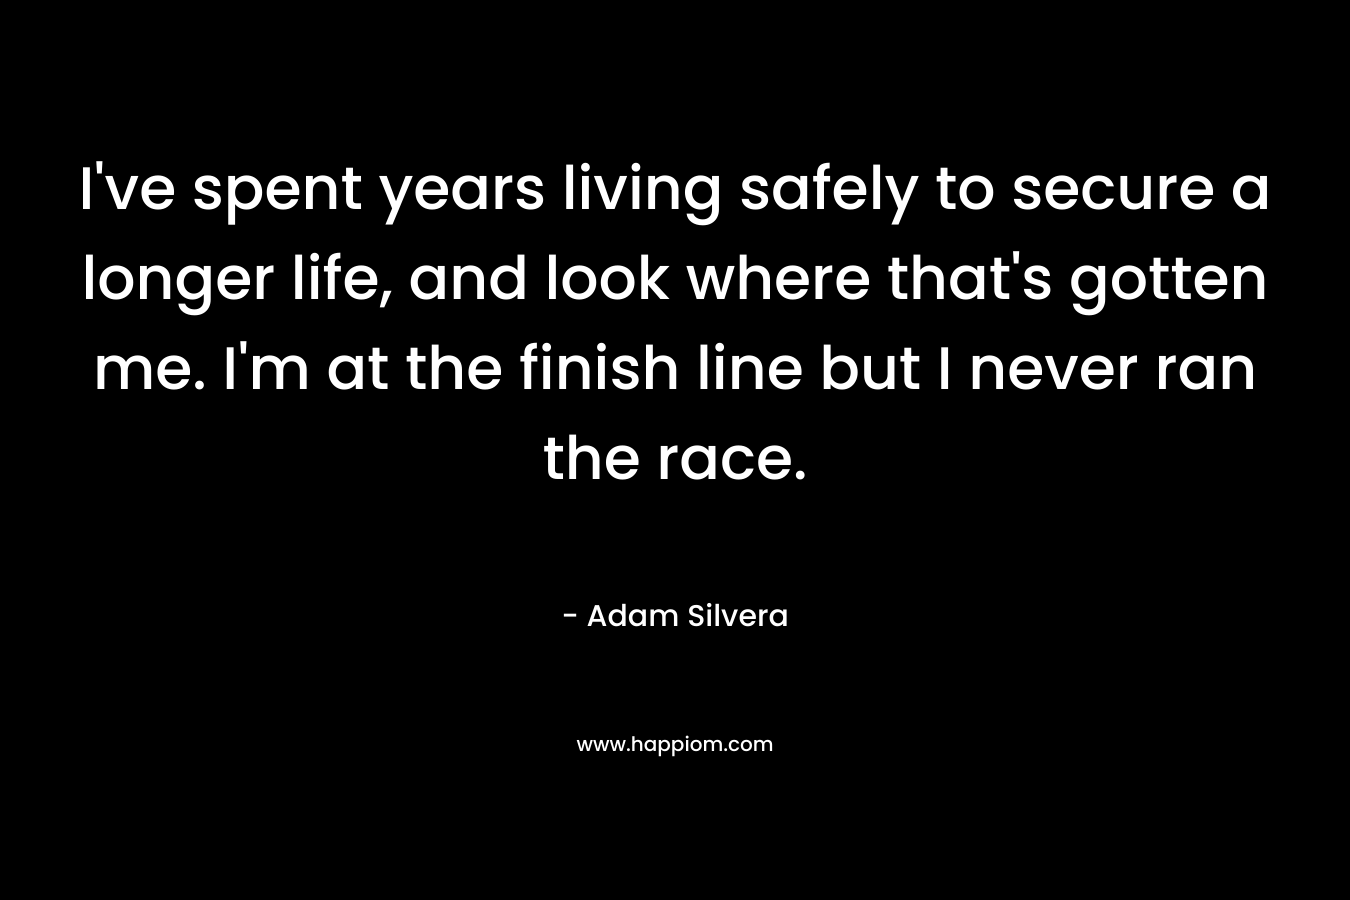 I’ve spent years living safely to secure a longer life, and look where that’s gotten me. I’m at the finish line but I never ran the race. – Adam Silvera